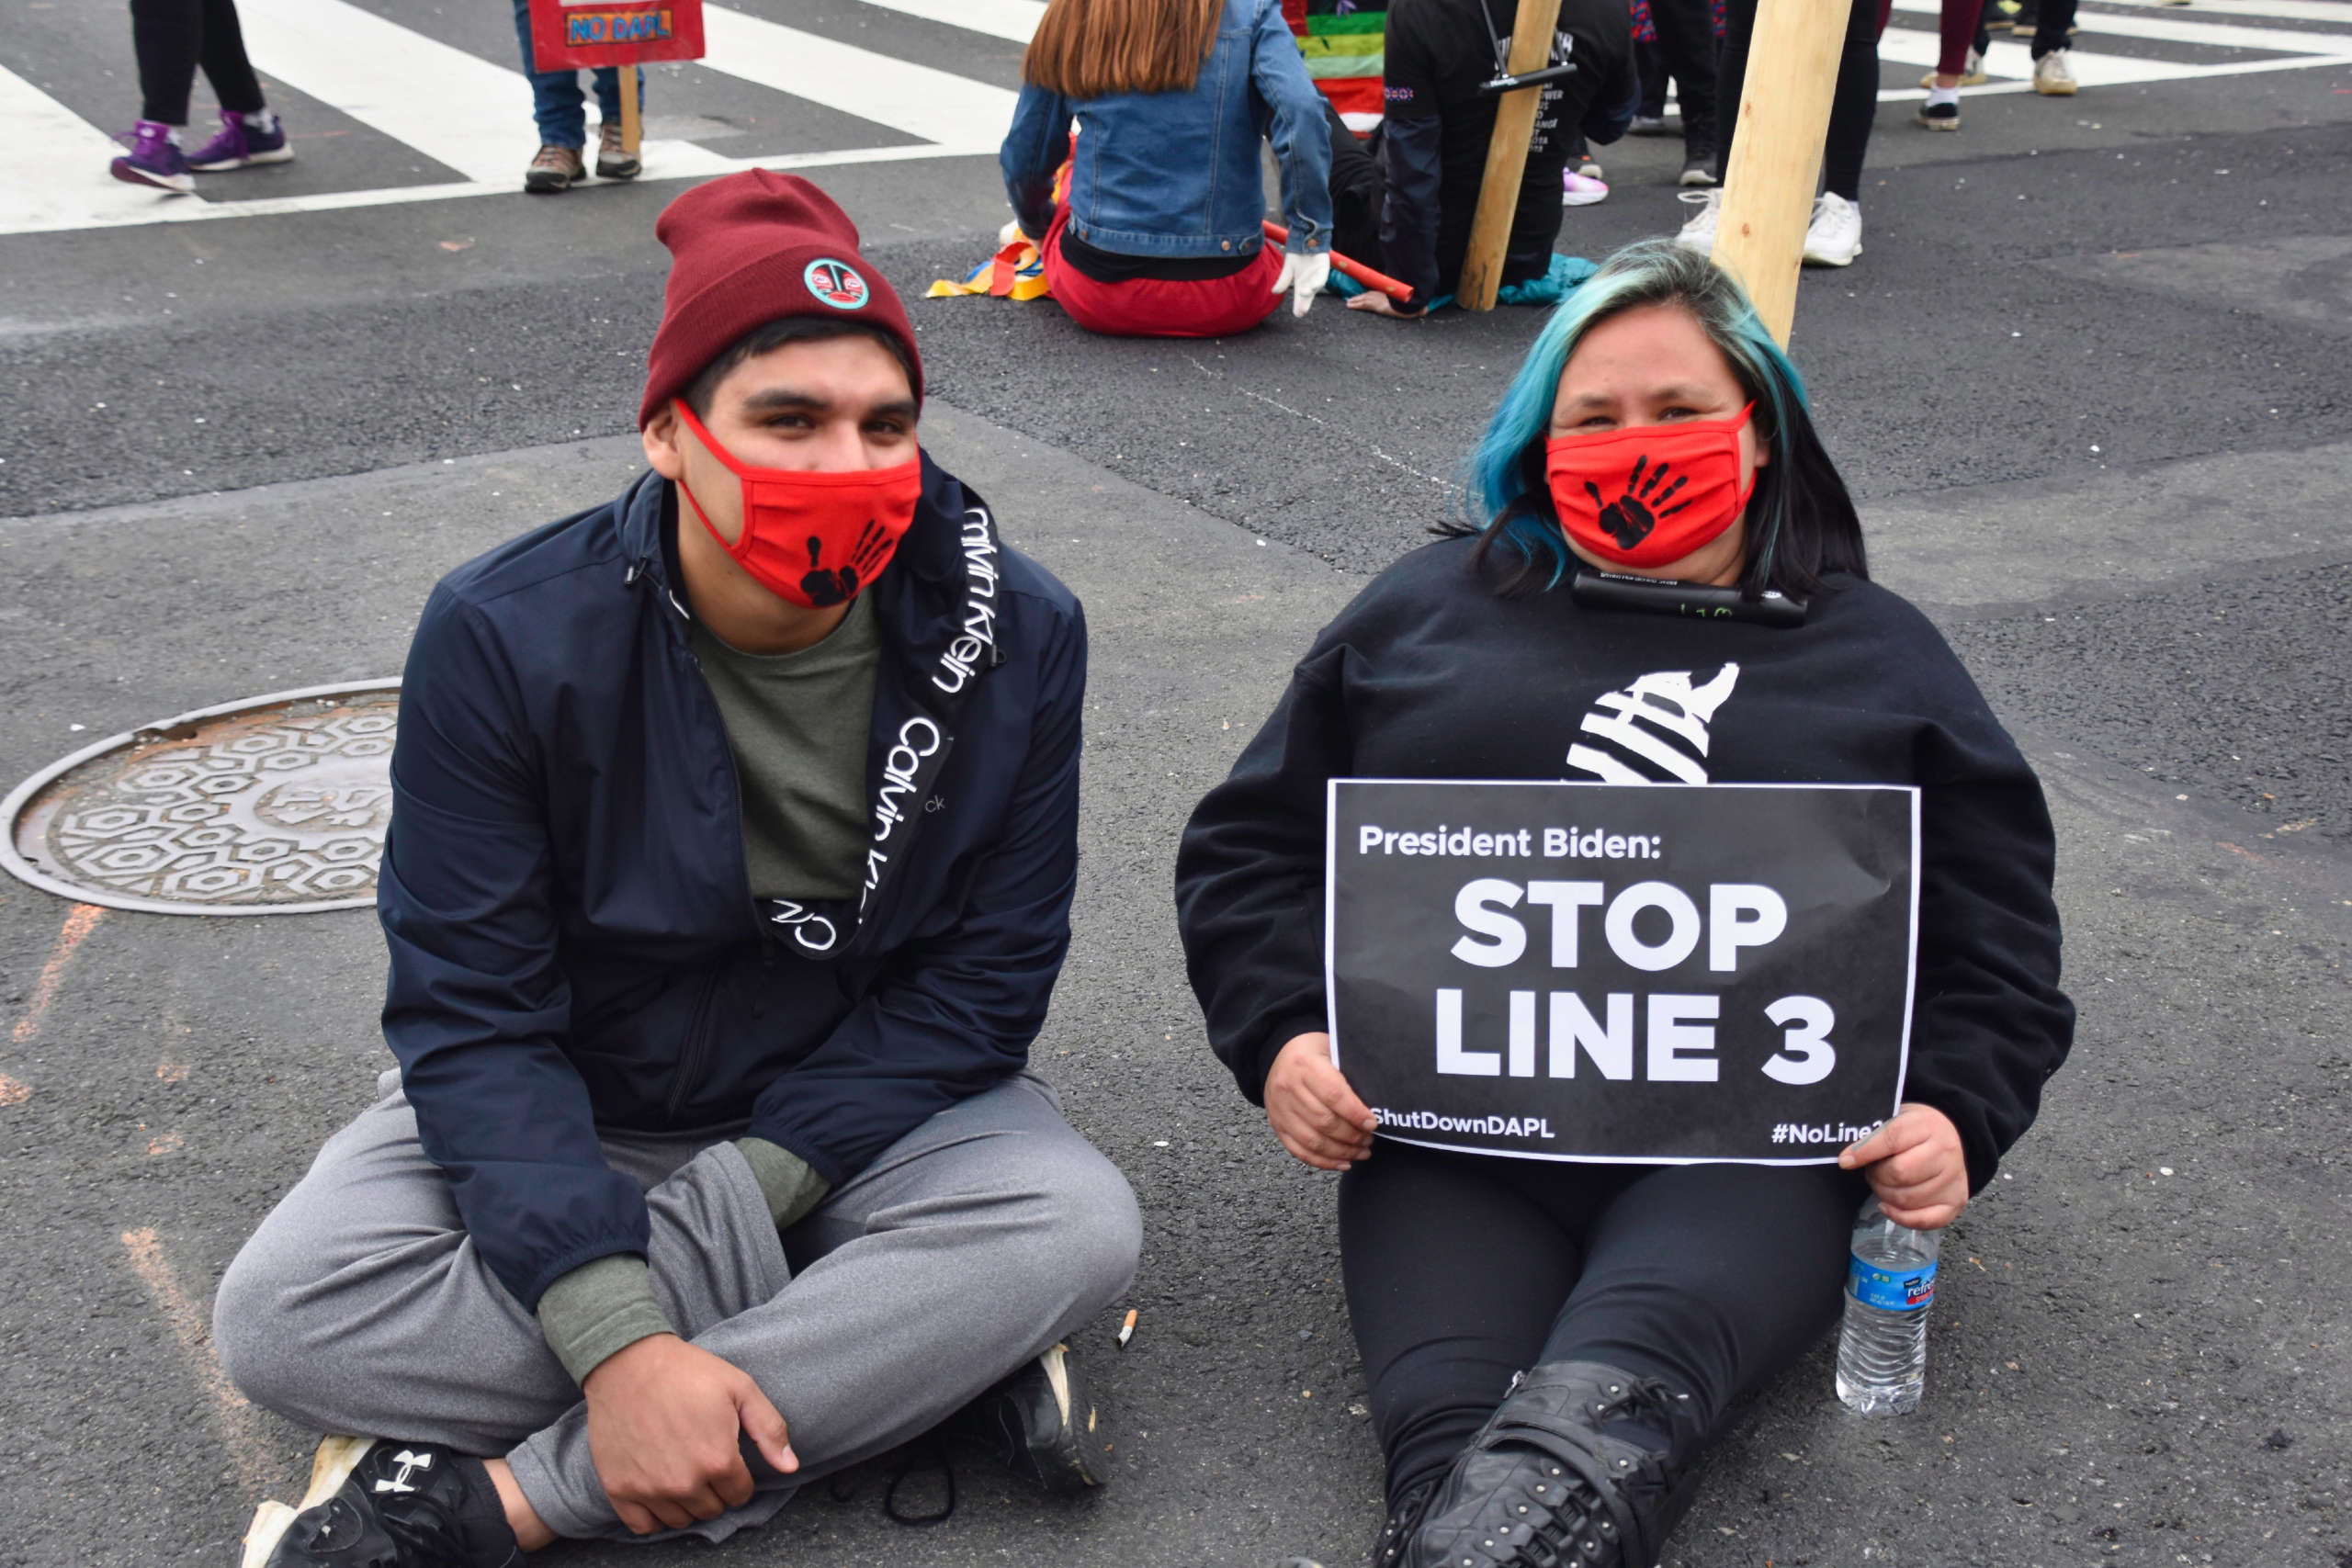 Waniye Lock locked down in the middle of Black Lives Matter Plaza in Washington, D.C., to show to Biden that she’ll do “whatever it takes” to stop the Dakota Access and Line 3 pipelines on April 1, 2021.